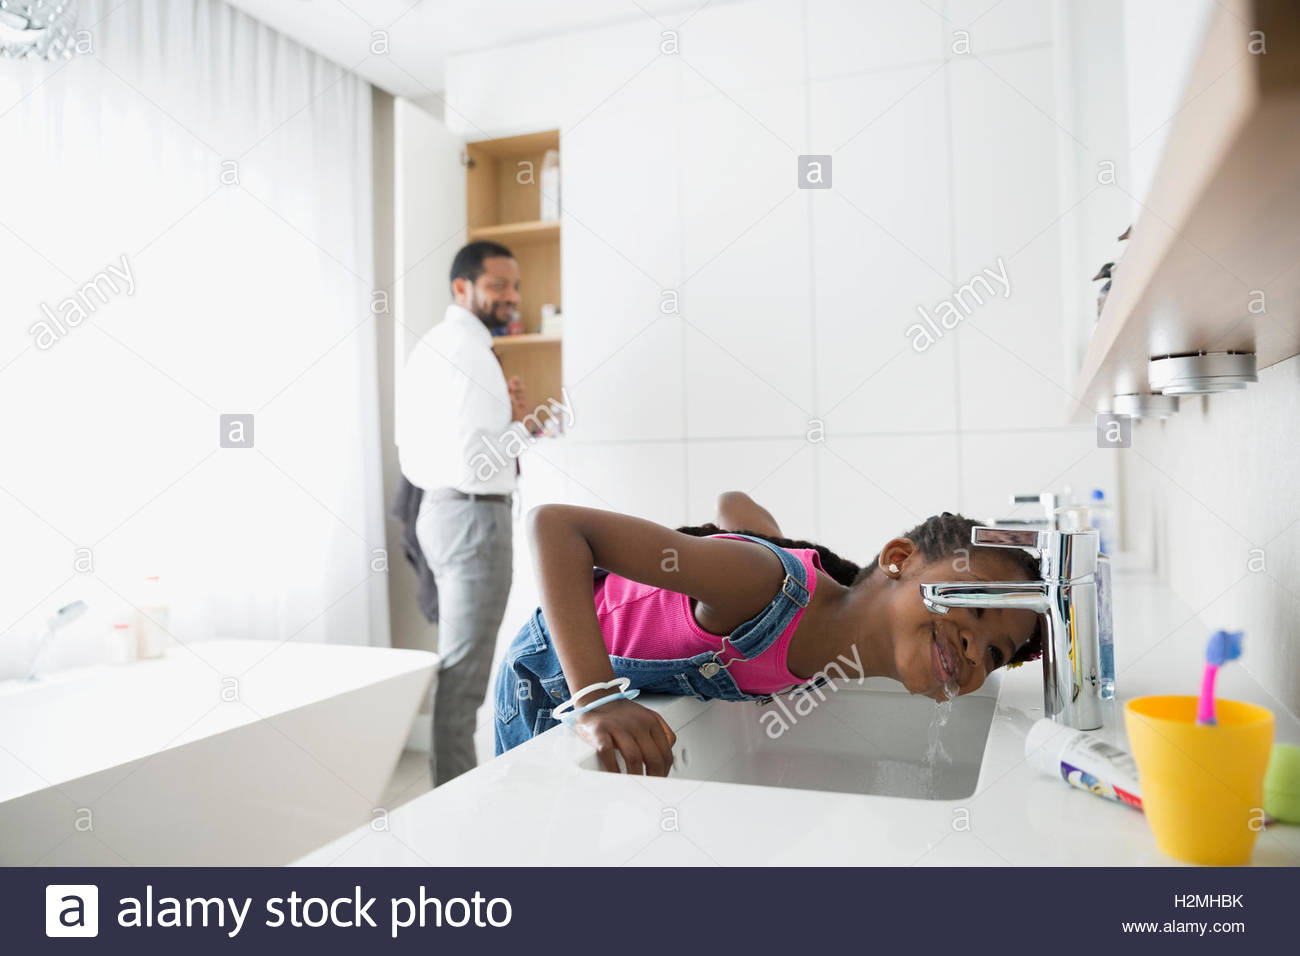 Father watching daughter sipping water from faucet in bathroom Stock Photo